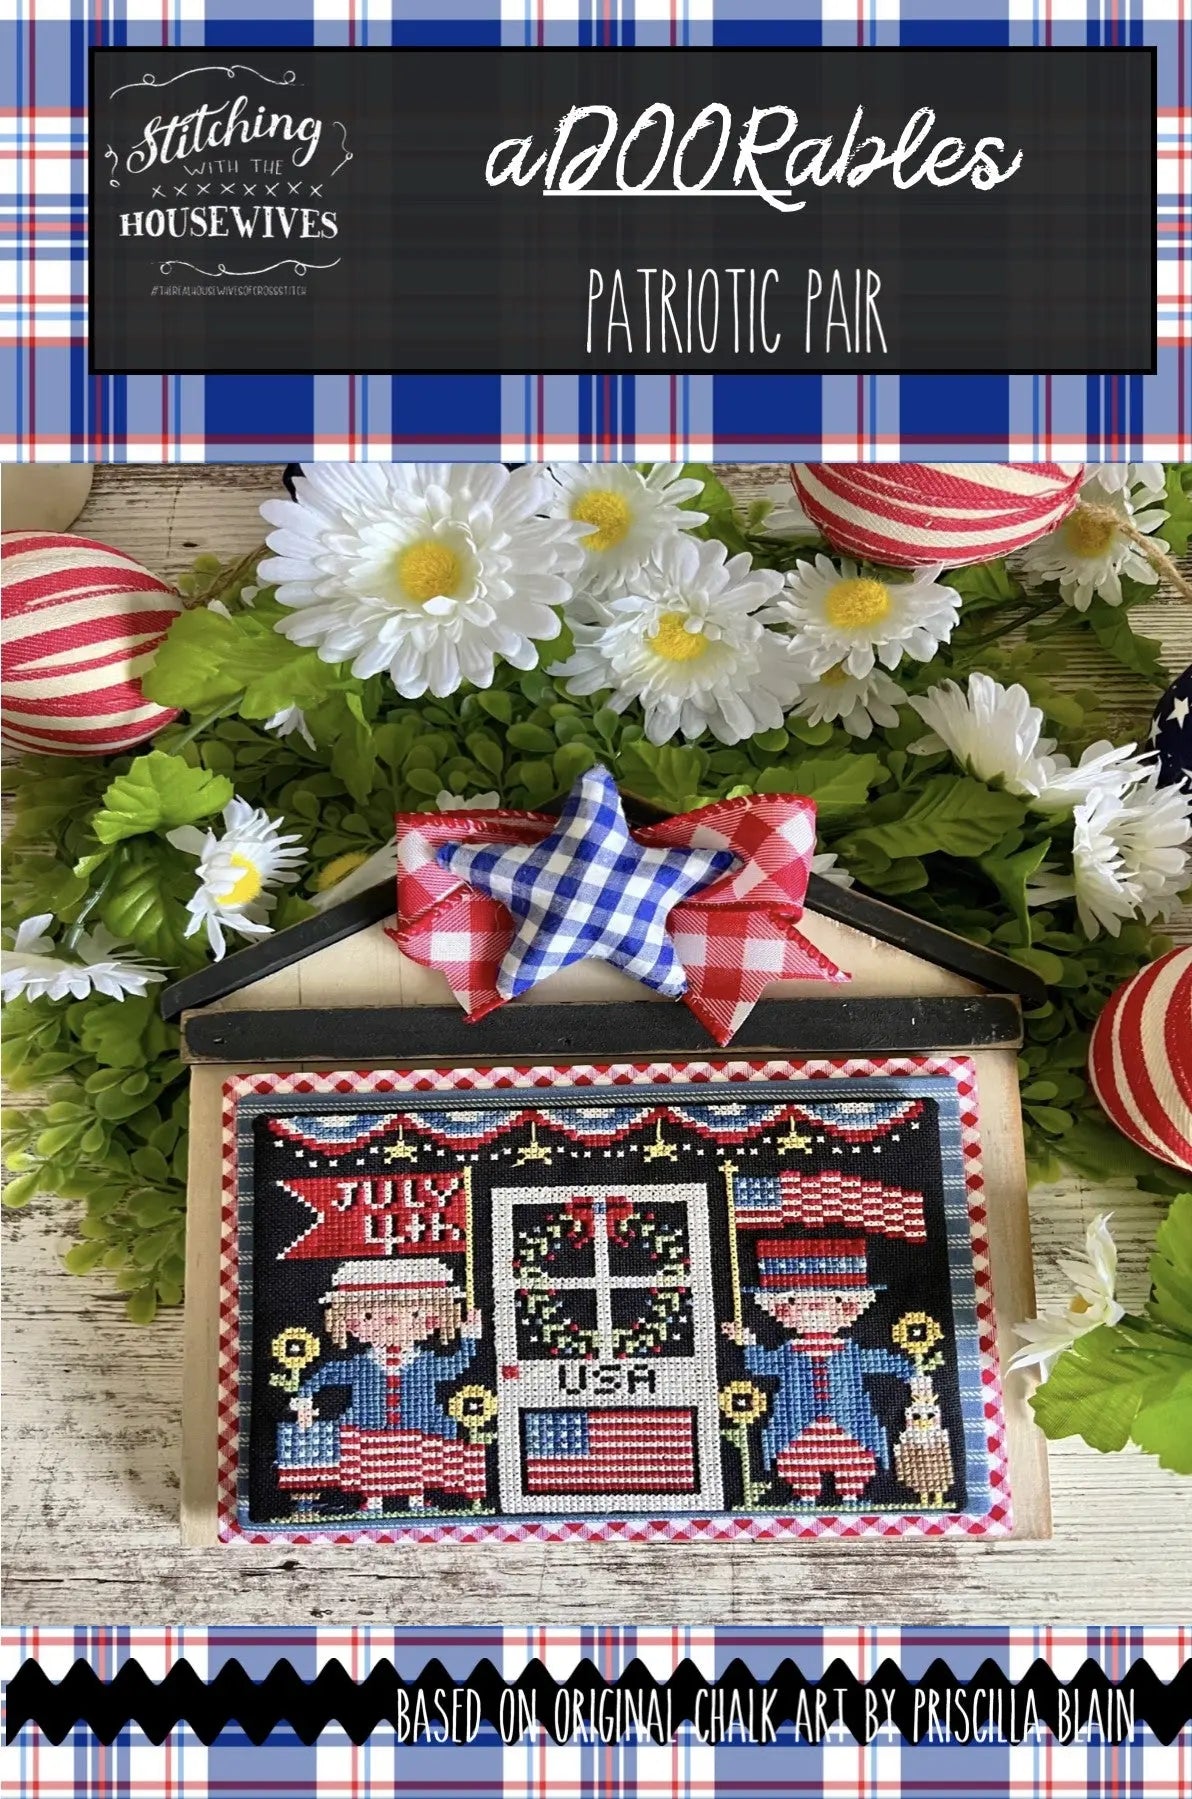 Adoorables Patriotic Pair by Stitching With the Housewives Stitching with the Housewives